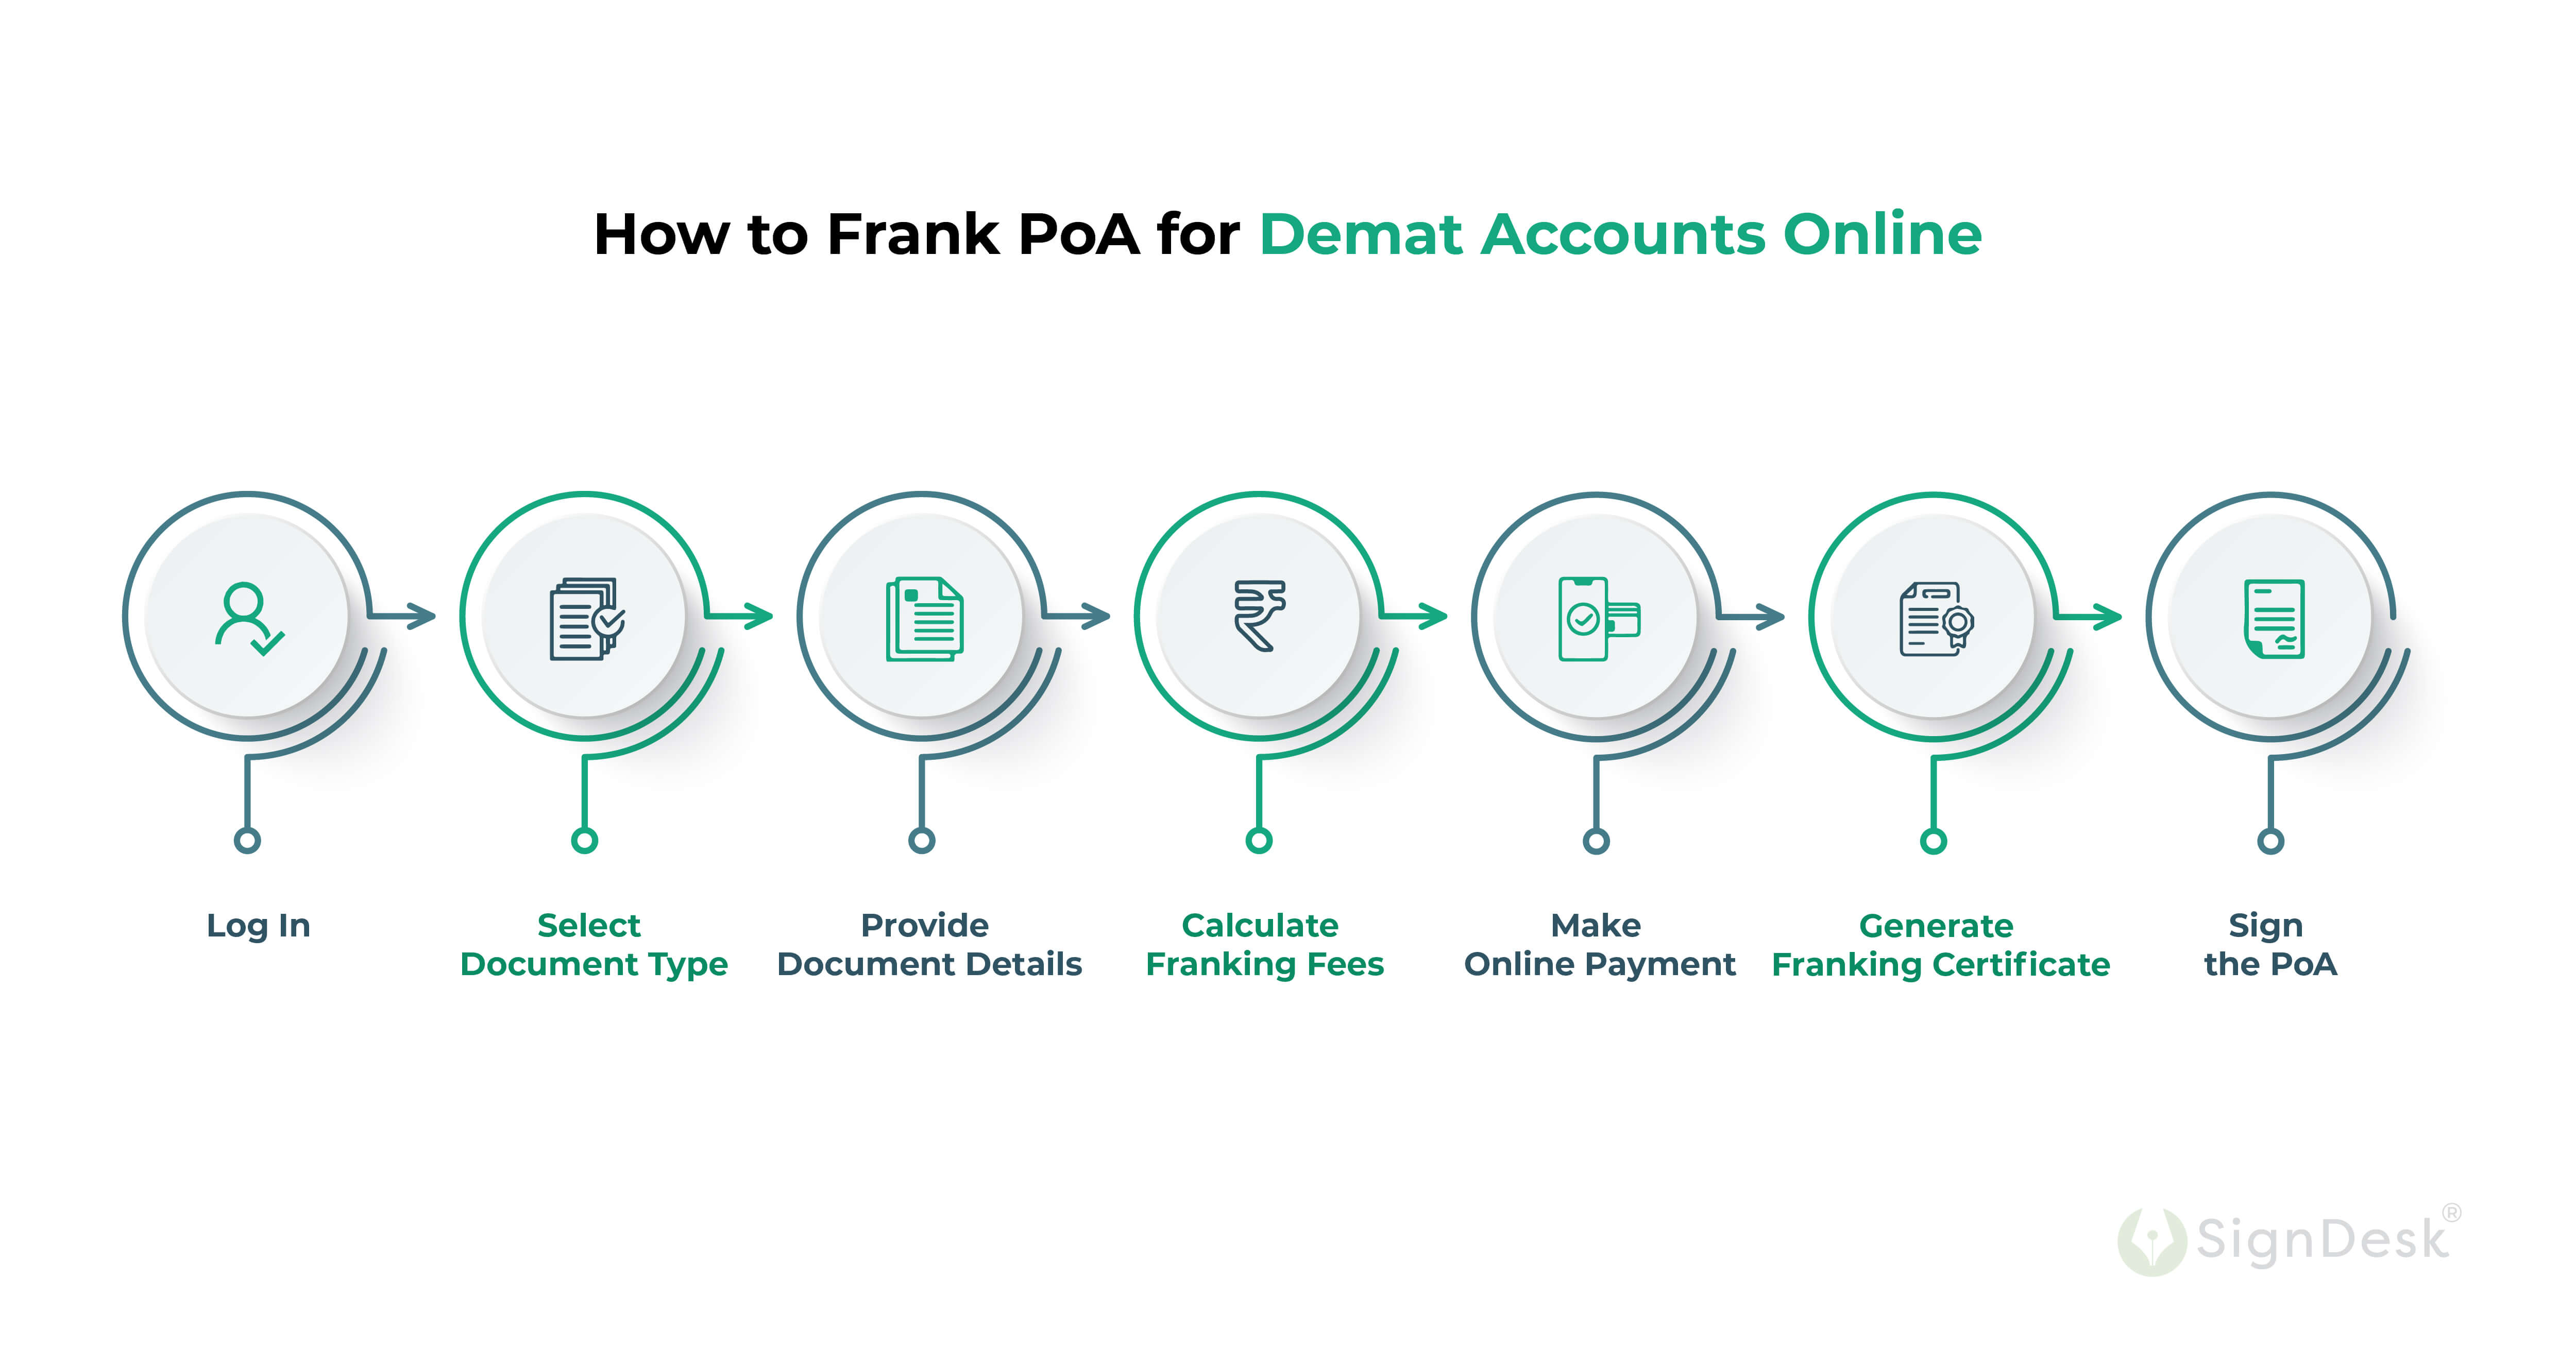 Steps to Frank PoA for Demat Accounts Online